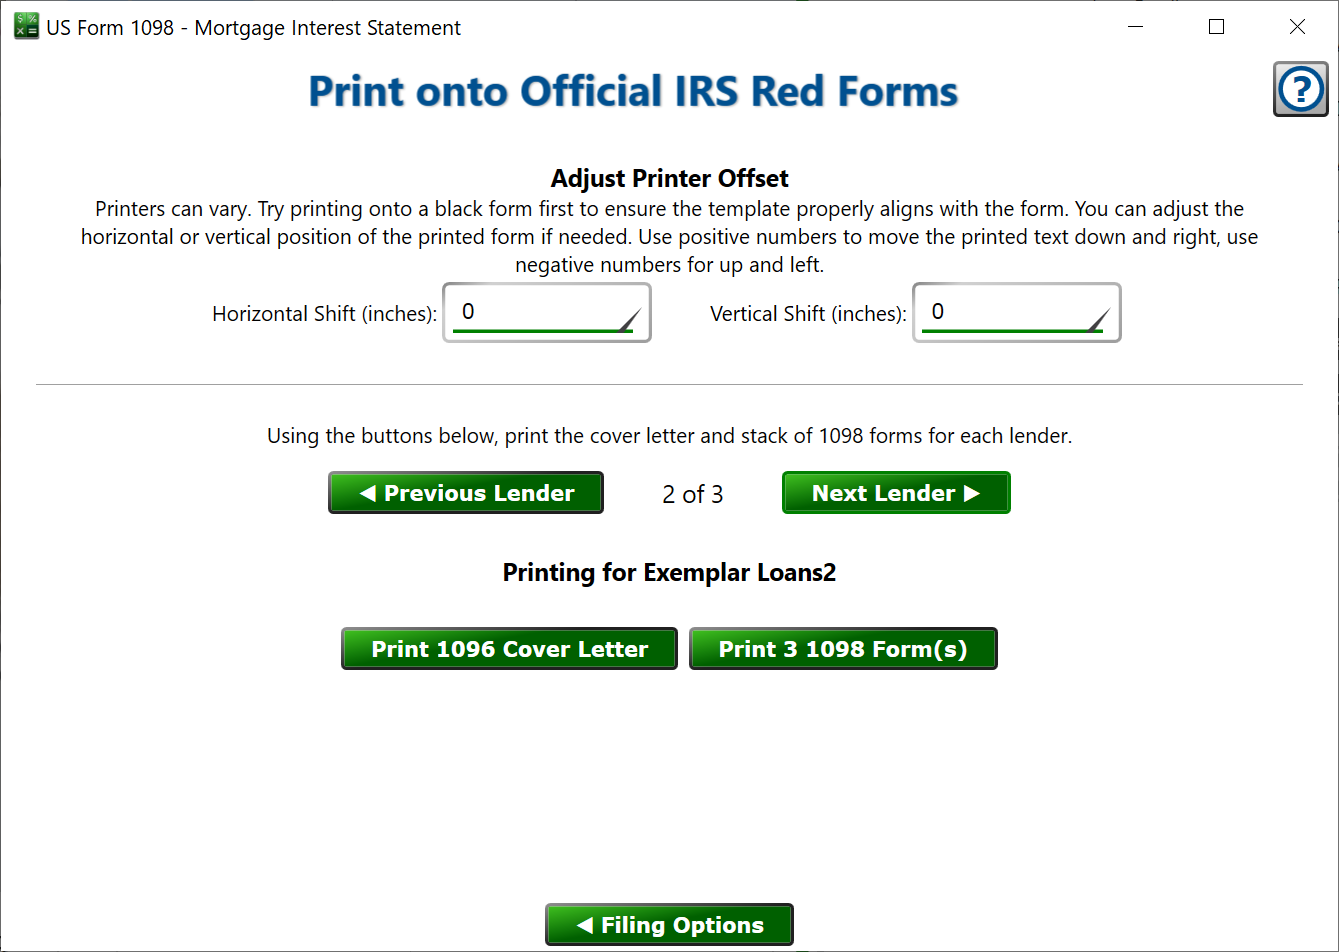 Printing onto Official IRS Forms